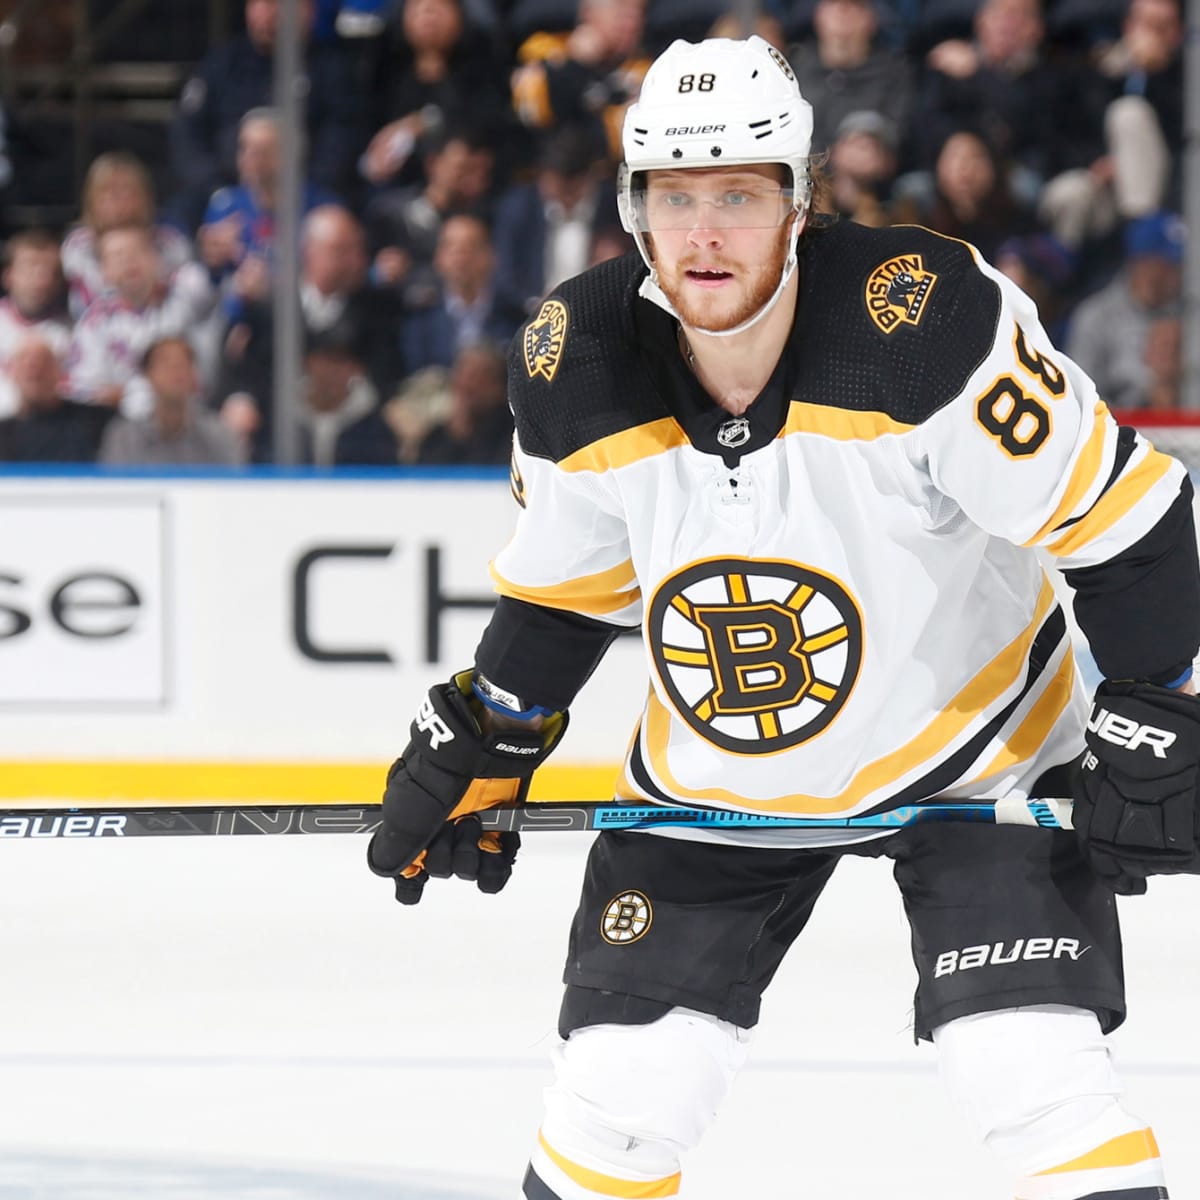 Bruins' David Pastrnak out Friday, 'day-to-day' with core injury